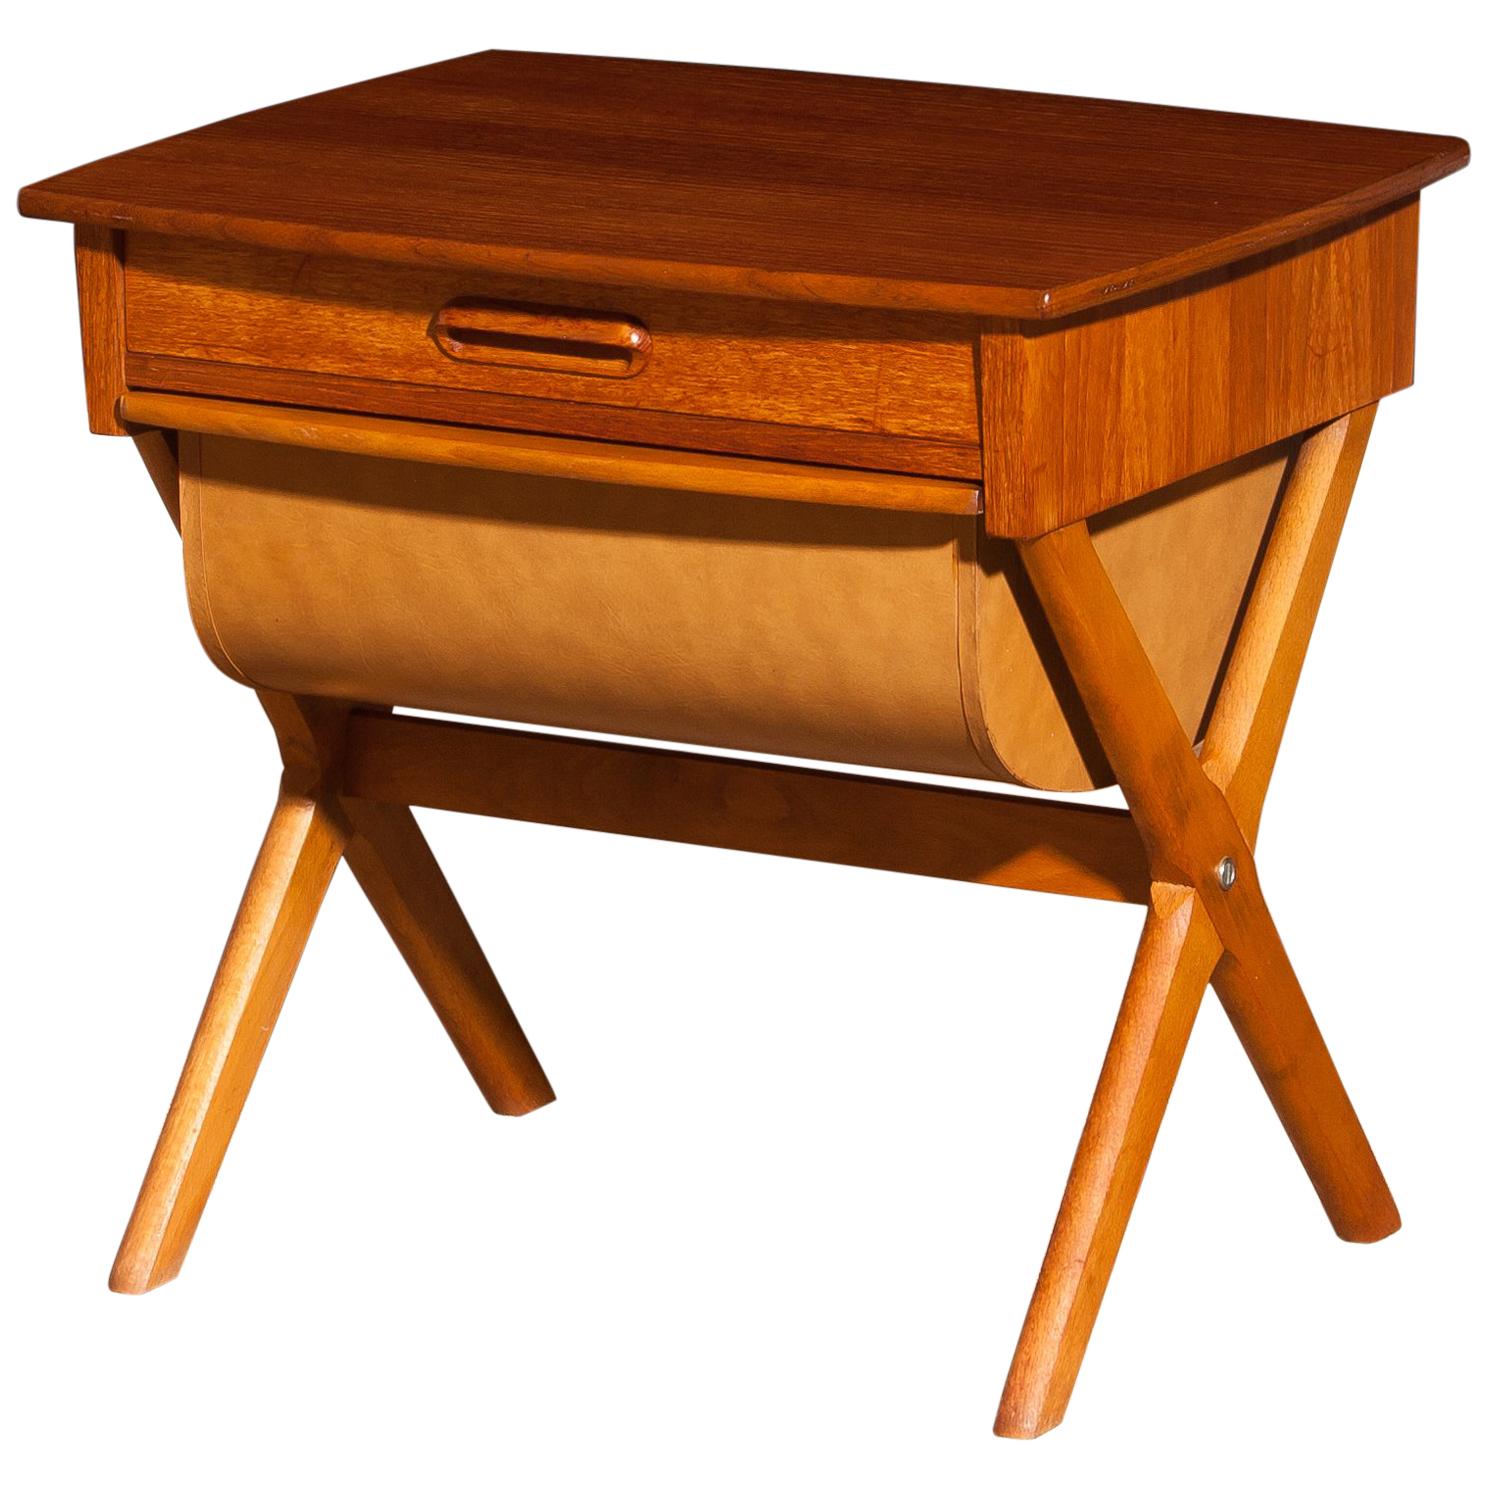 Very nice sewing table made in Sweden.
This table is made of teak and has one normal drawer and one deep drawer.
It is in a beautiful condition.
Period 1960s.
Dimensions: H 52 cm, W 52 cm, D 45 cm.